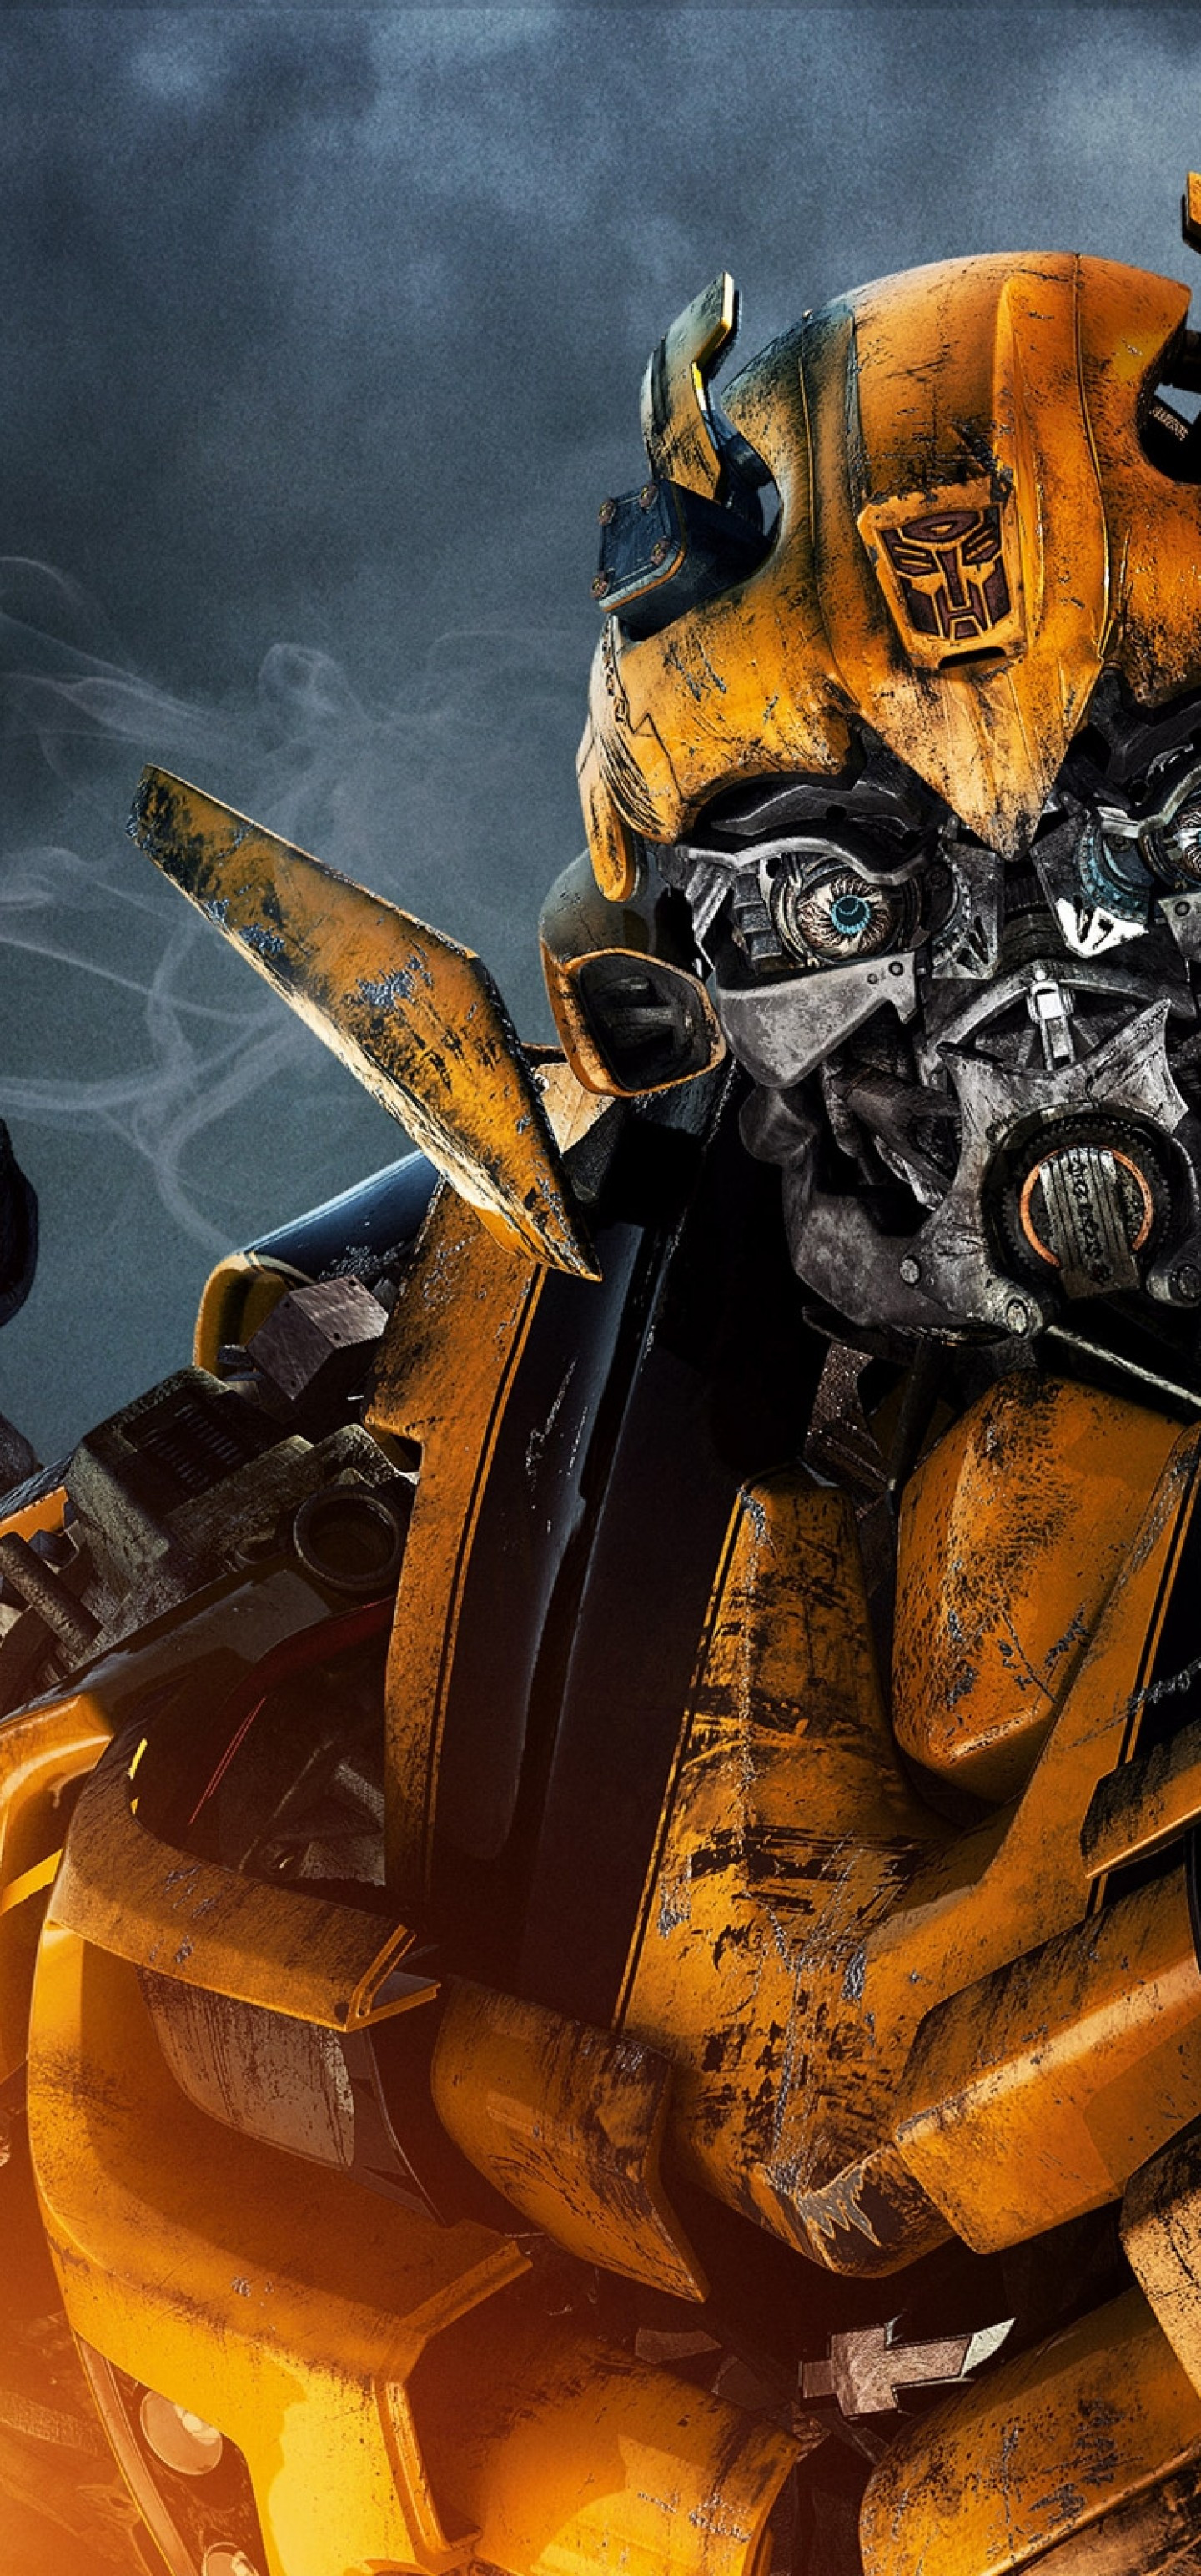 Download 1440x3088 Transformers, Bumblebee Wallpaper for Samsung Galaxy Note 20 Ultra